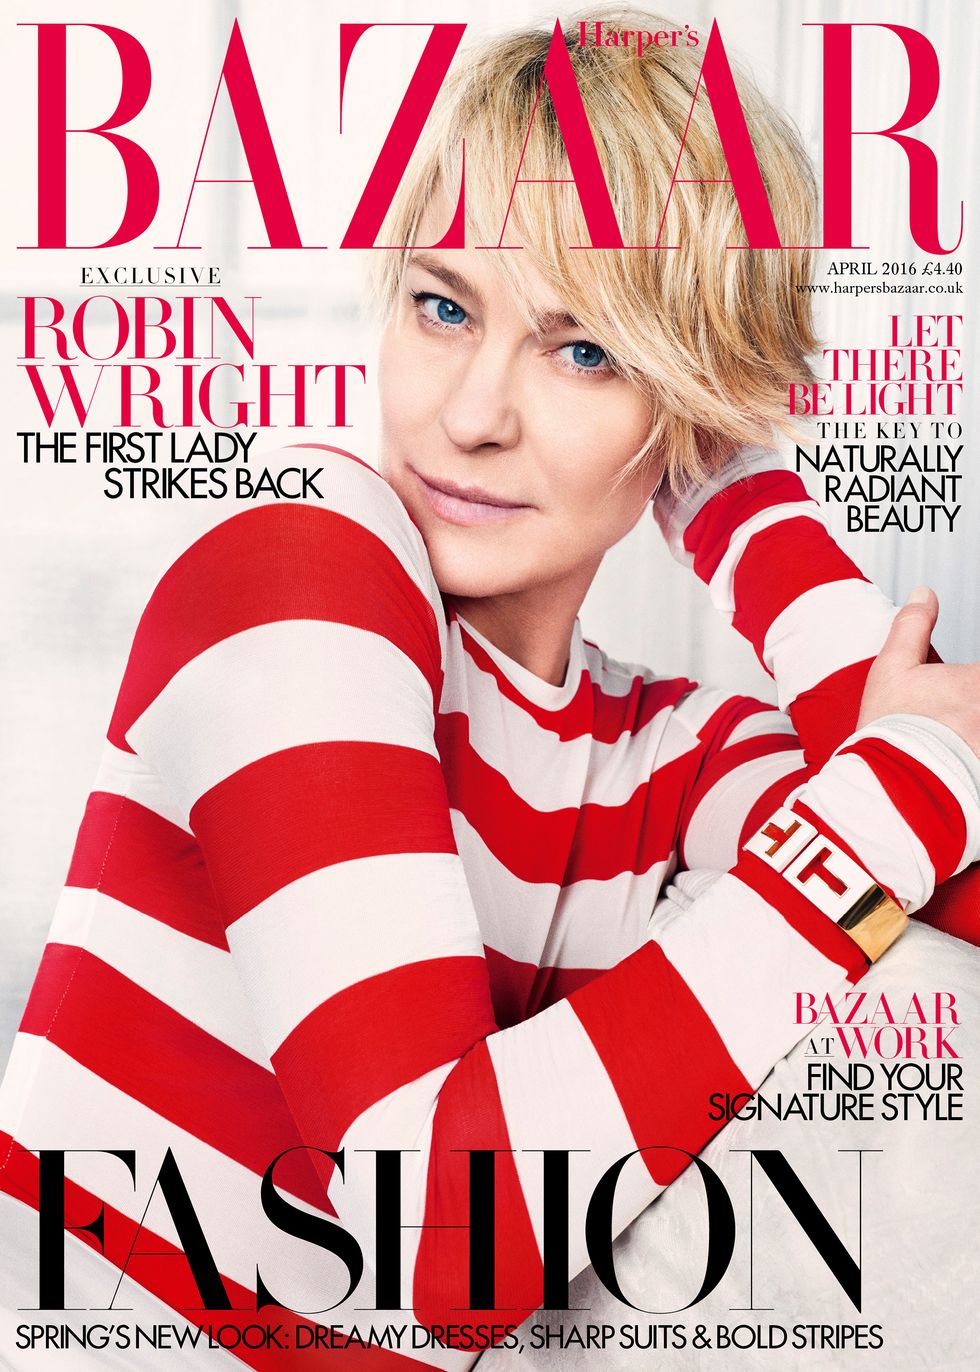 Robin Wright for Harper's Bazaar April 2016 issue newsstand cover